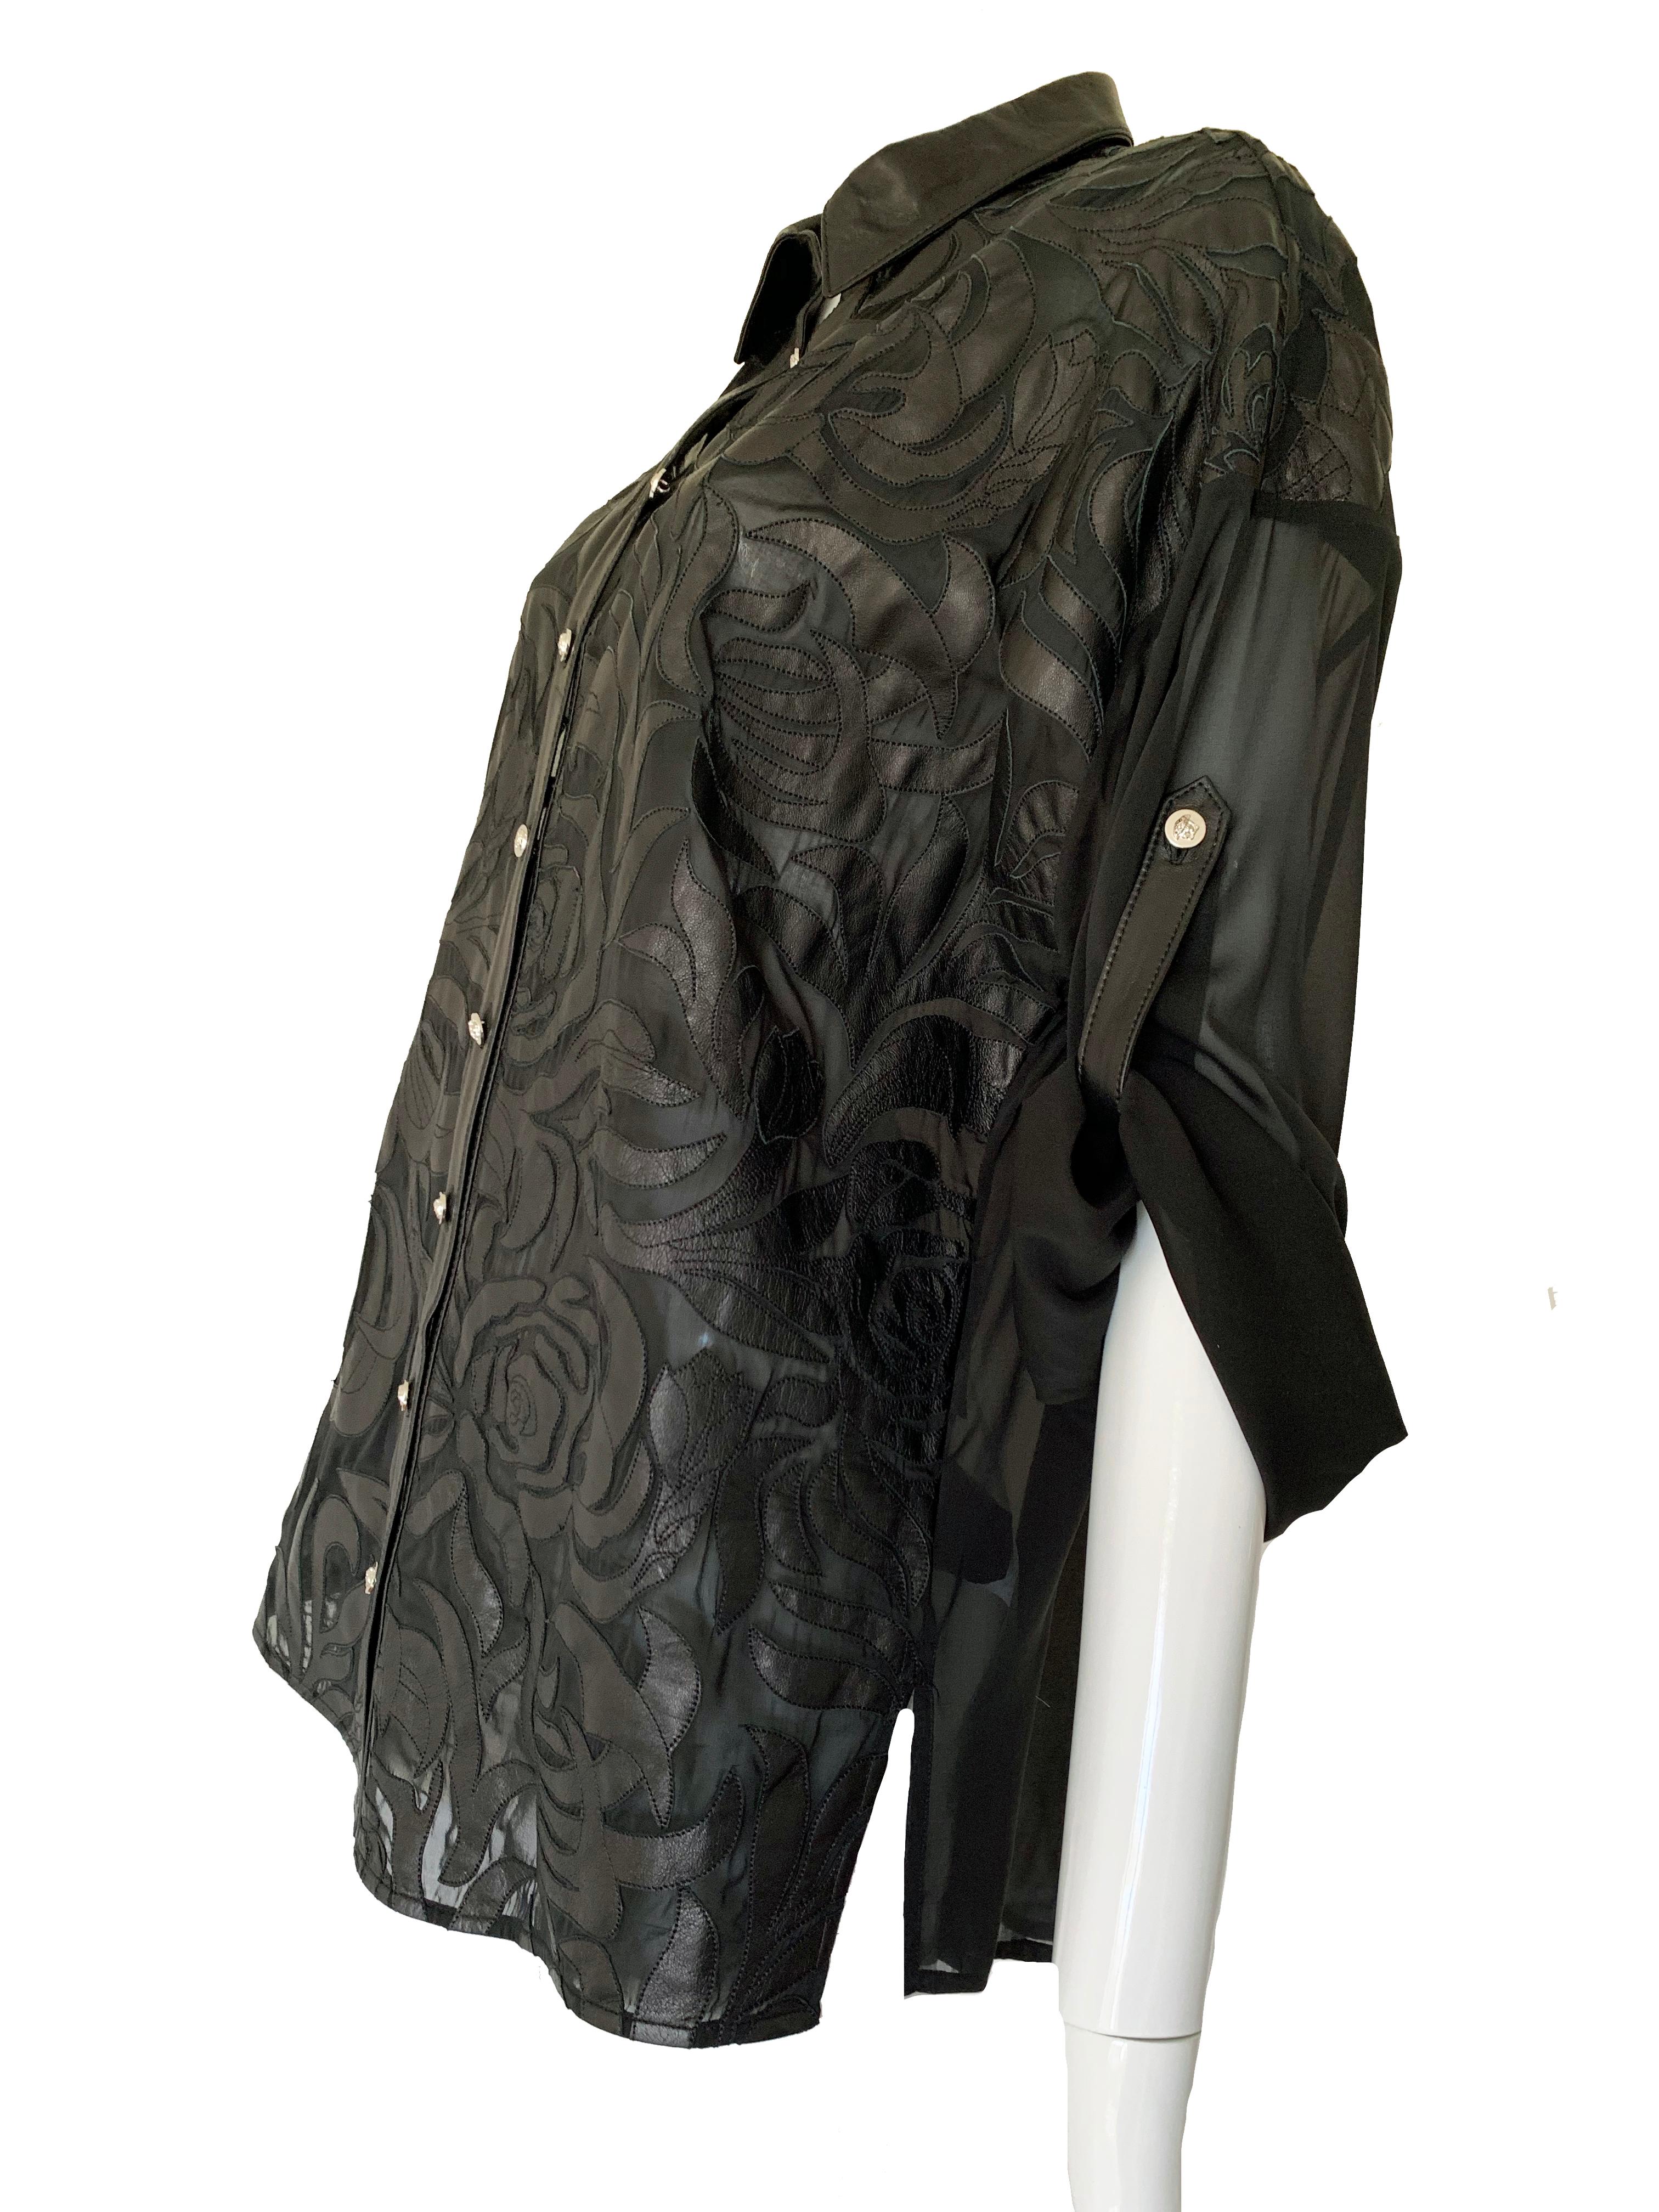 New Versace Silk Cut Out Leather Applique Shirt IT42 US 4-6 For Sale 1